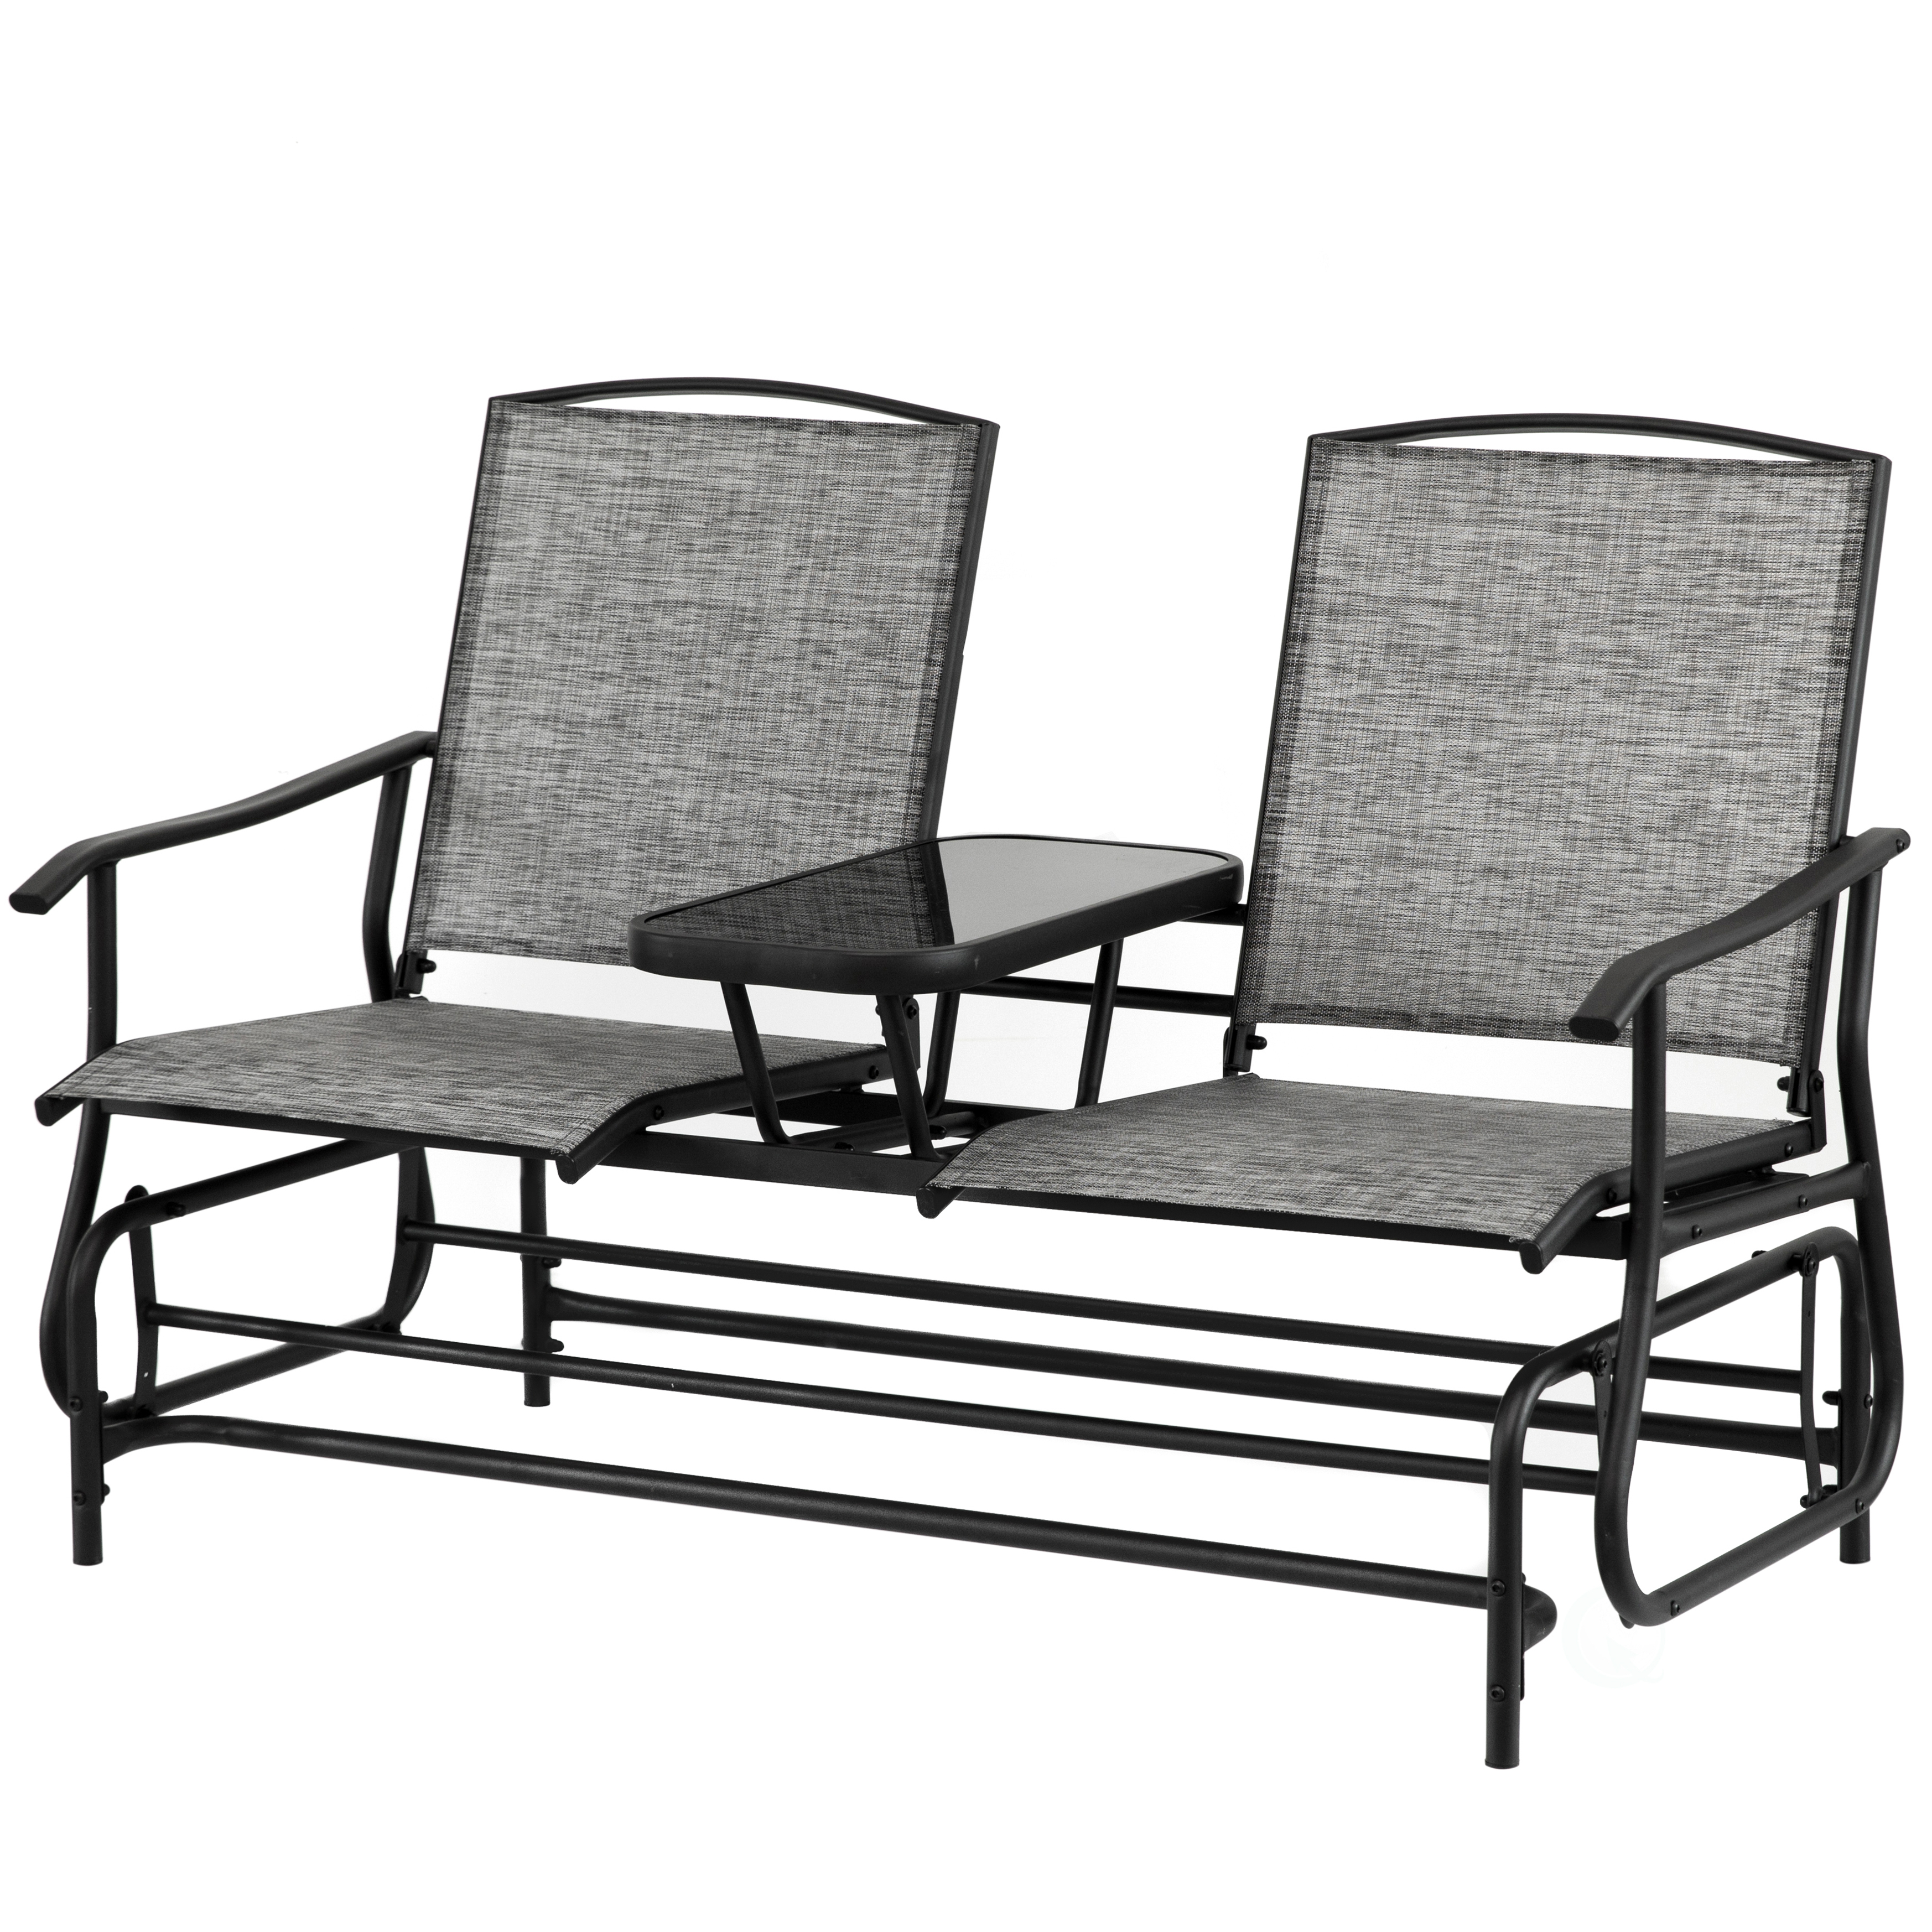 Two Person Outdoor Double Swing Glider Chair Set With Center Tempered Glass Table, Loveseat Lawn Rocker Bench